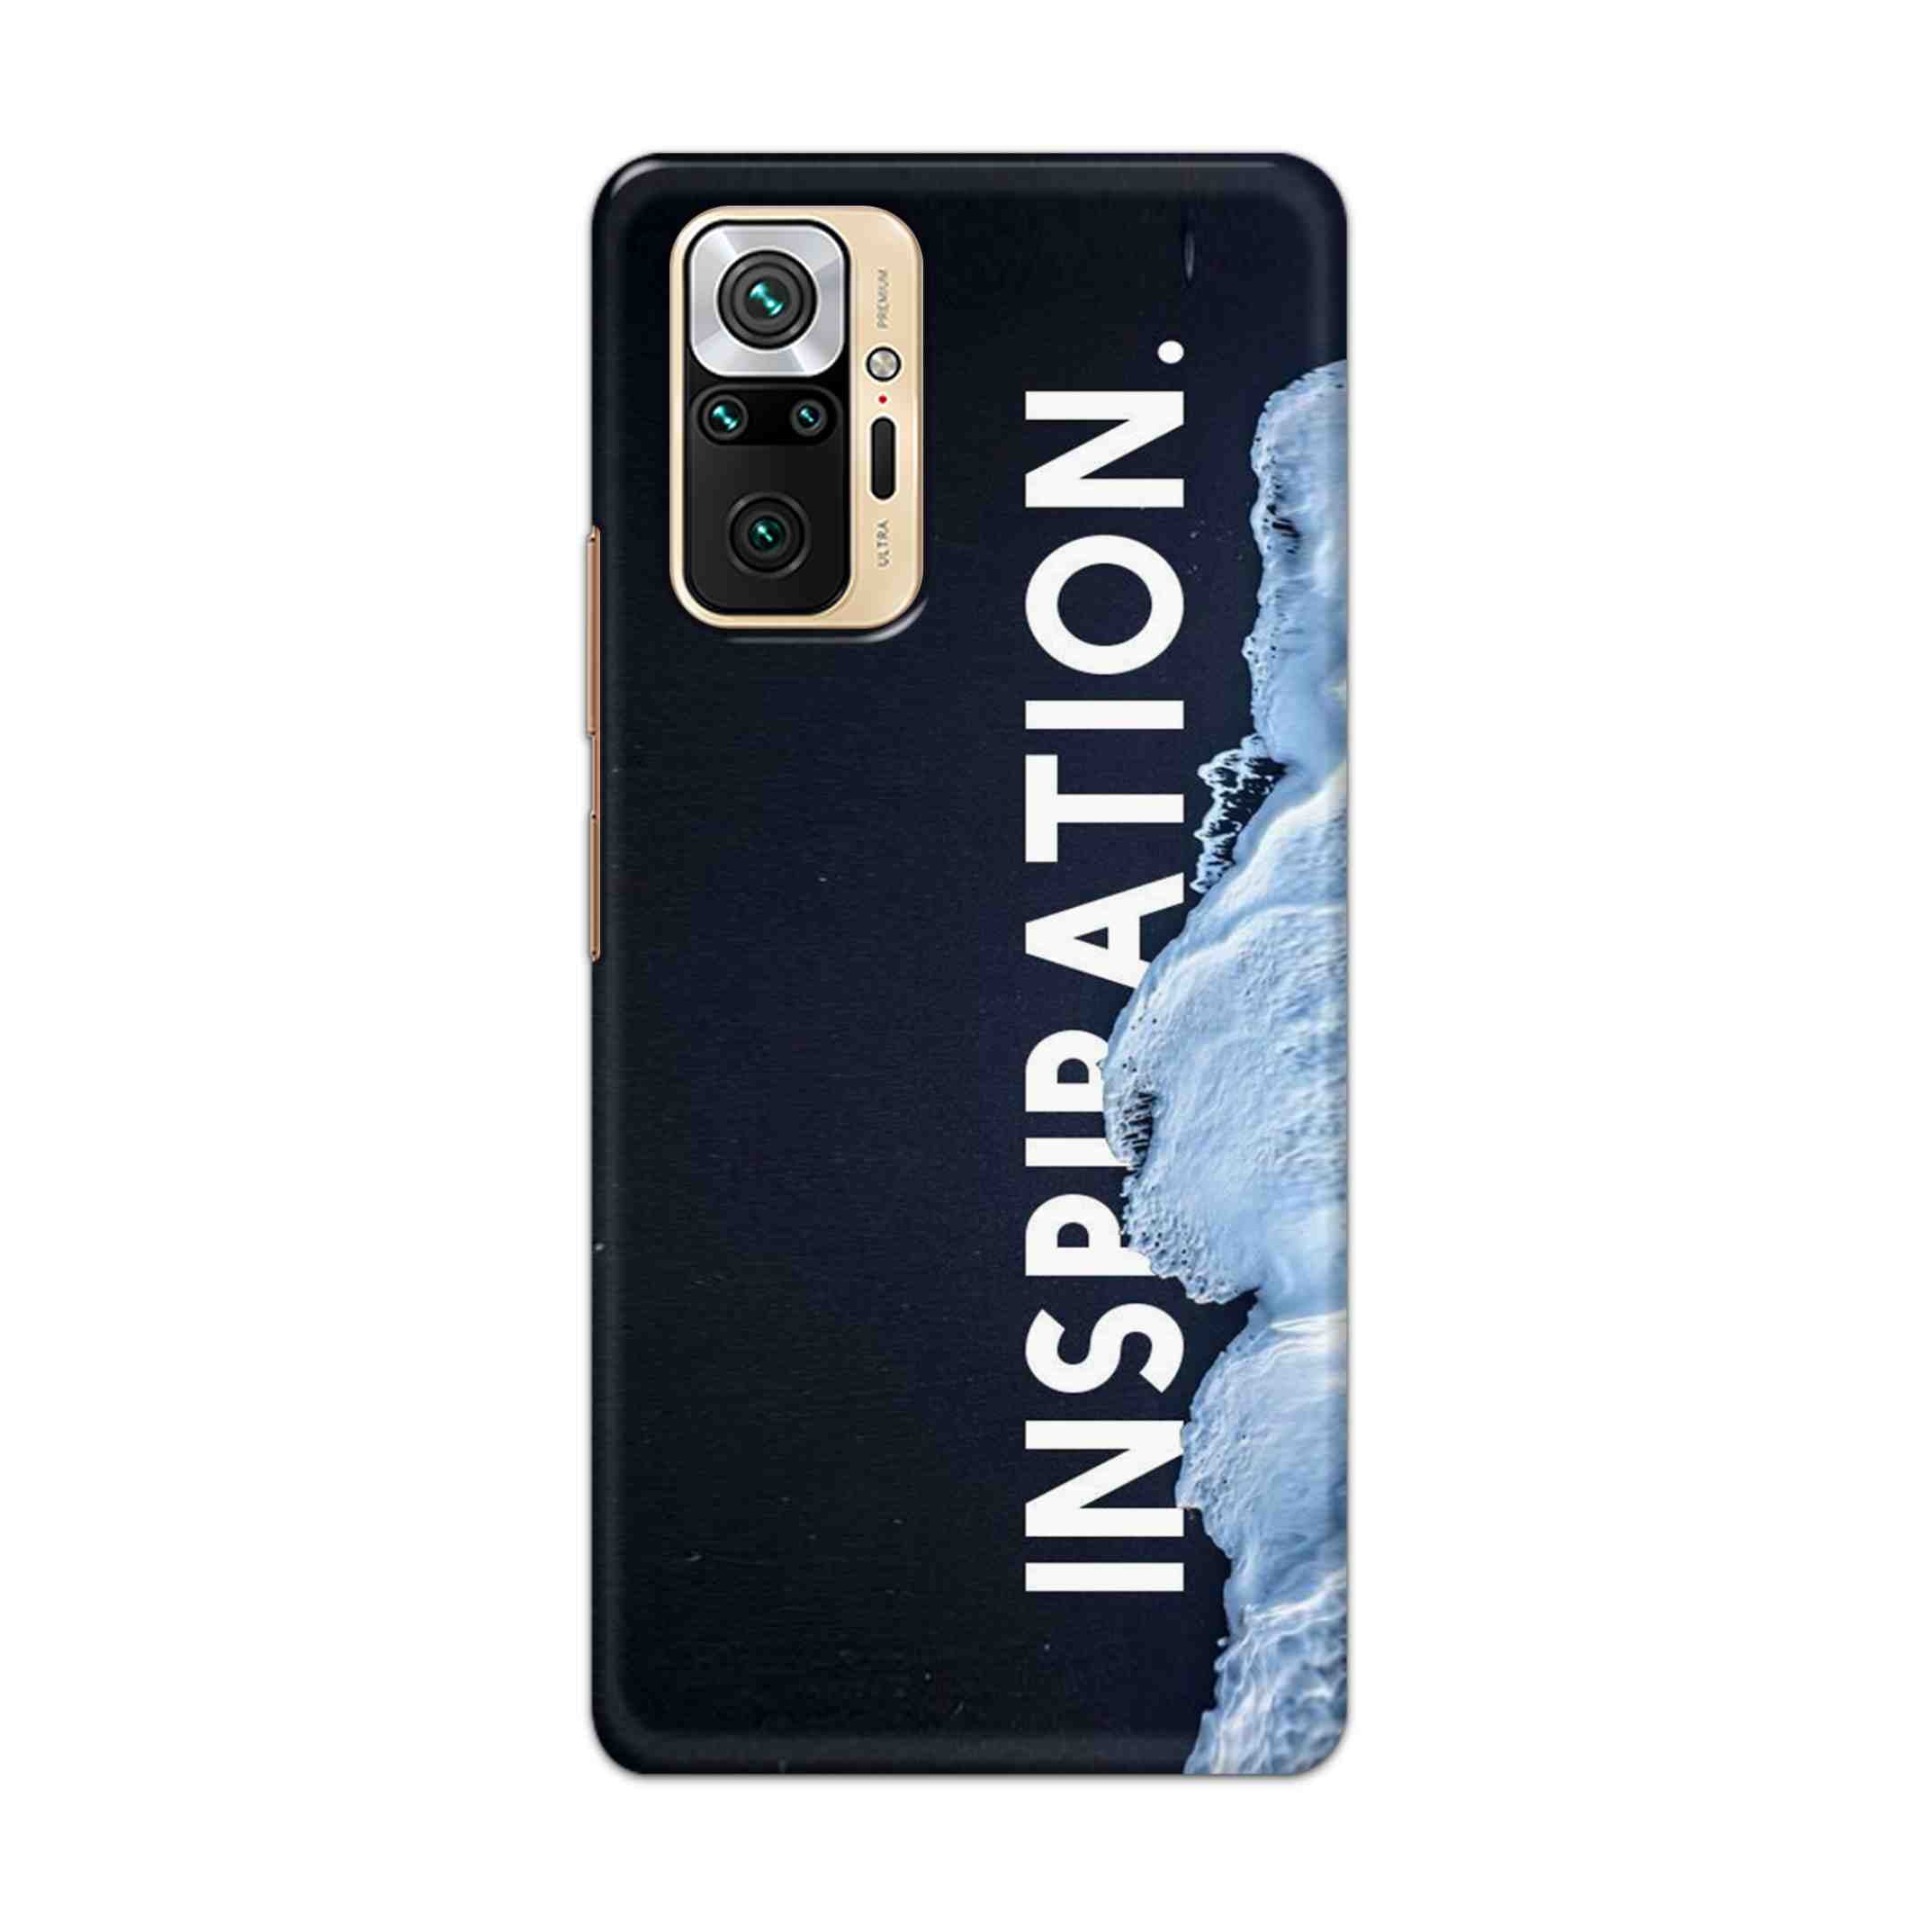 Buy Inspiration Hard Back Mobile Phone Case Cover For Redmi Note 10 Pro Online